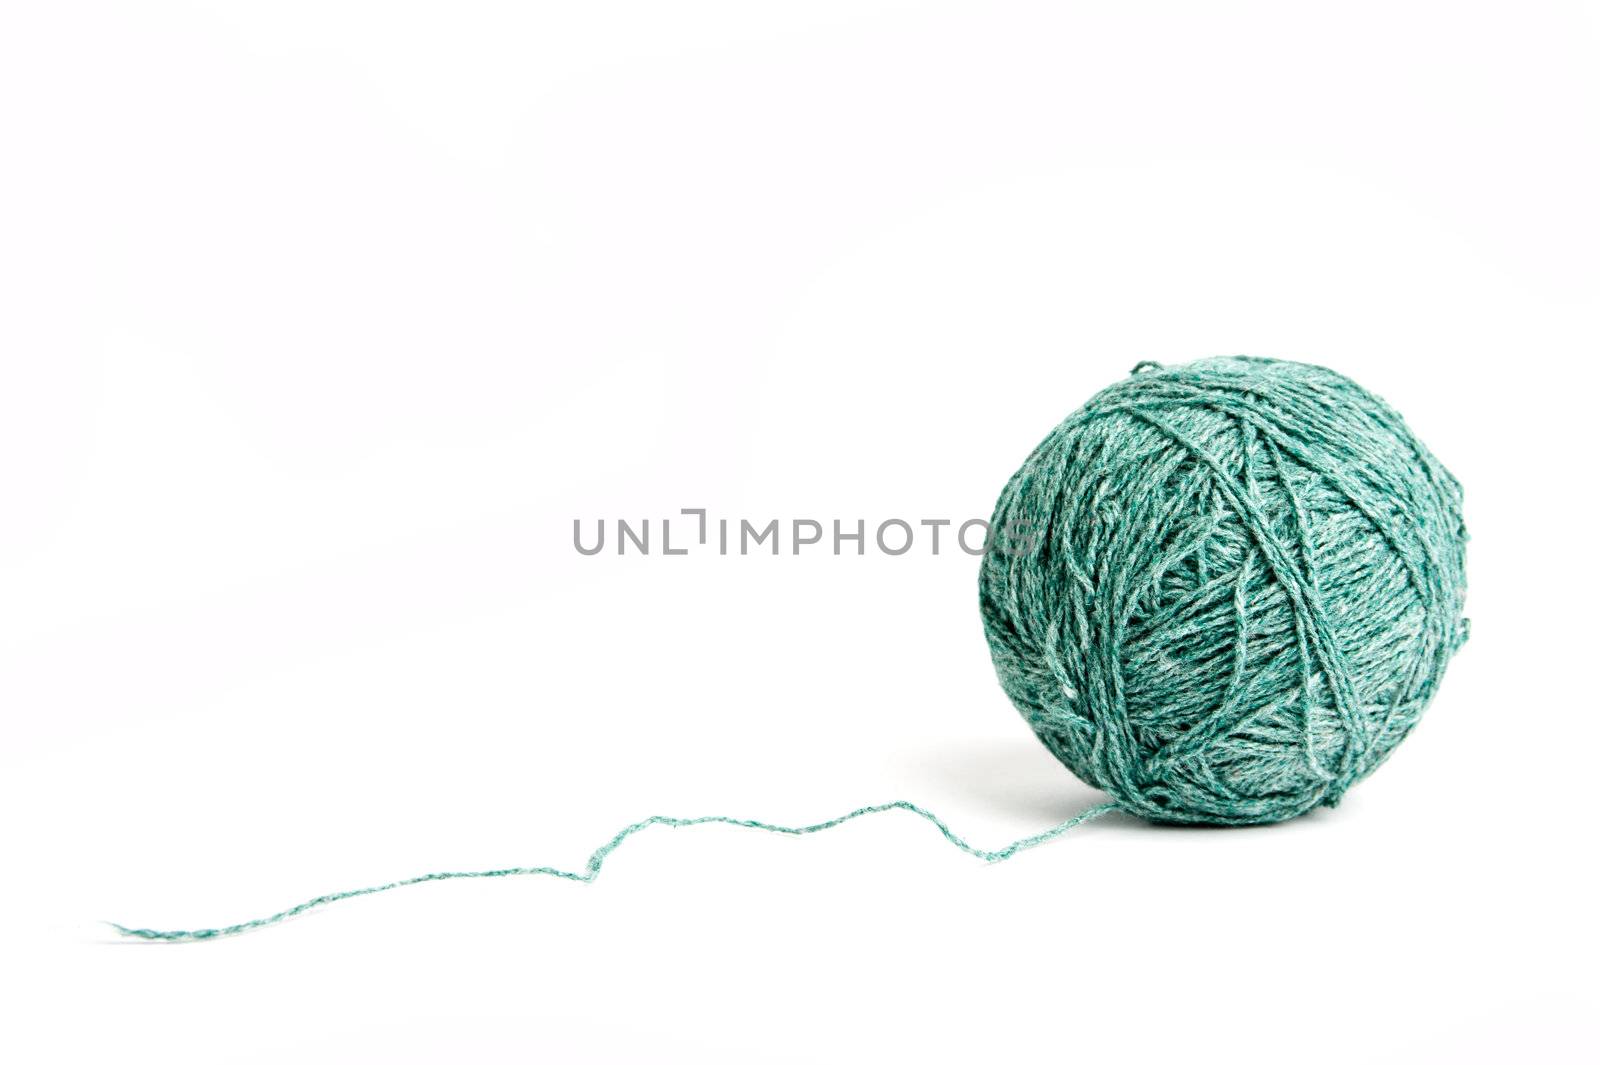 An image of a ball of green yarn on white background